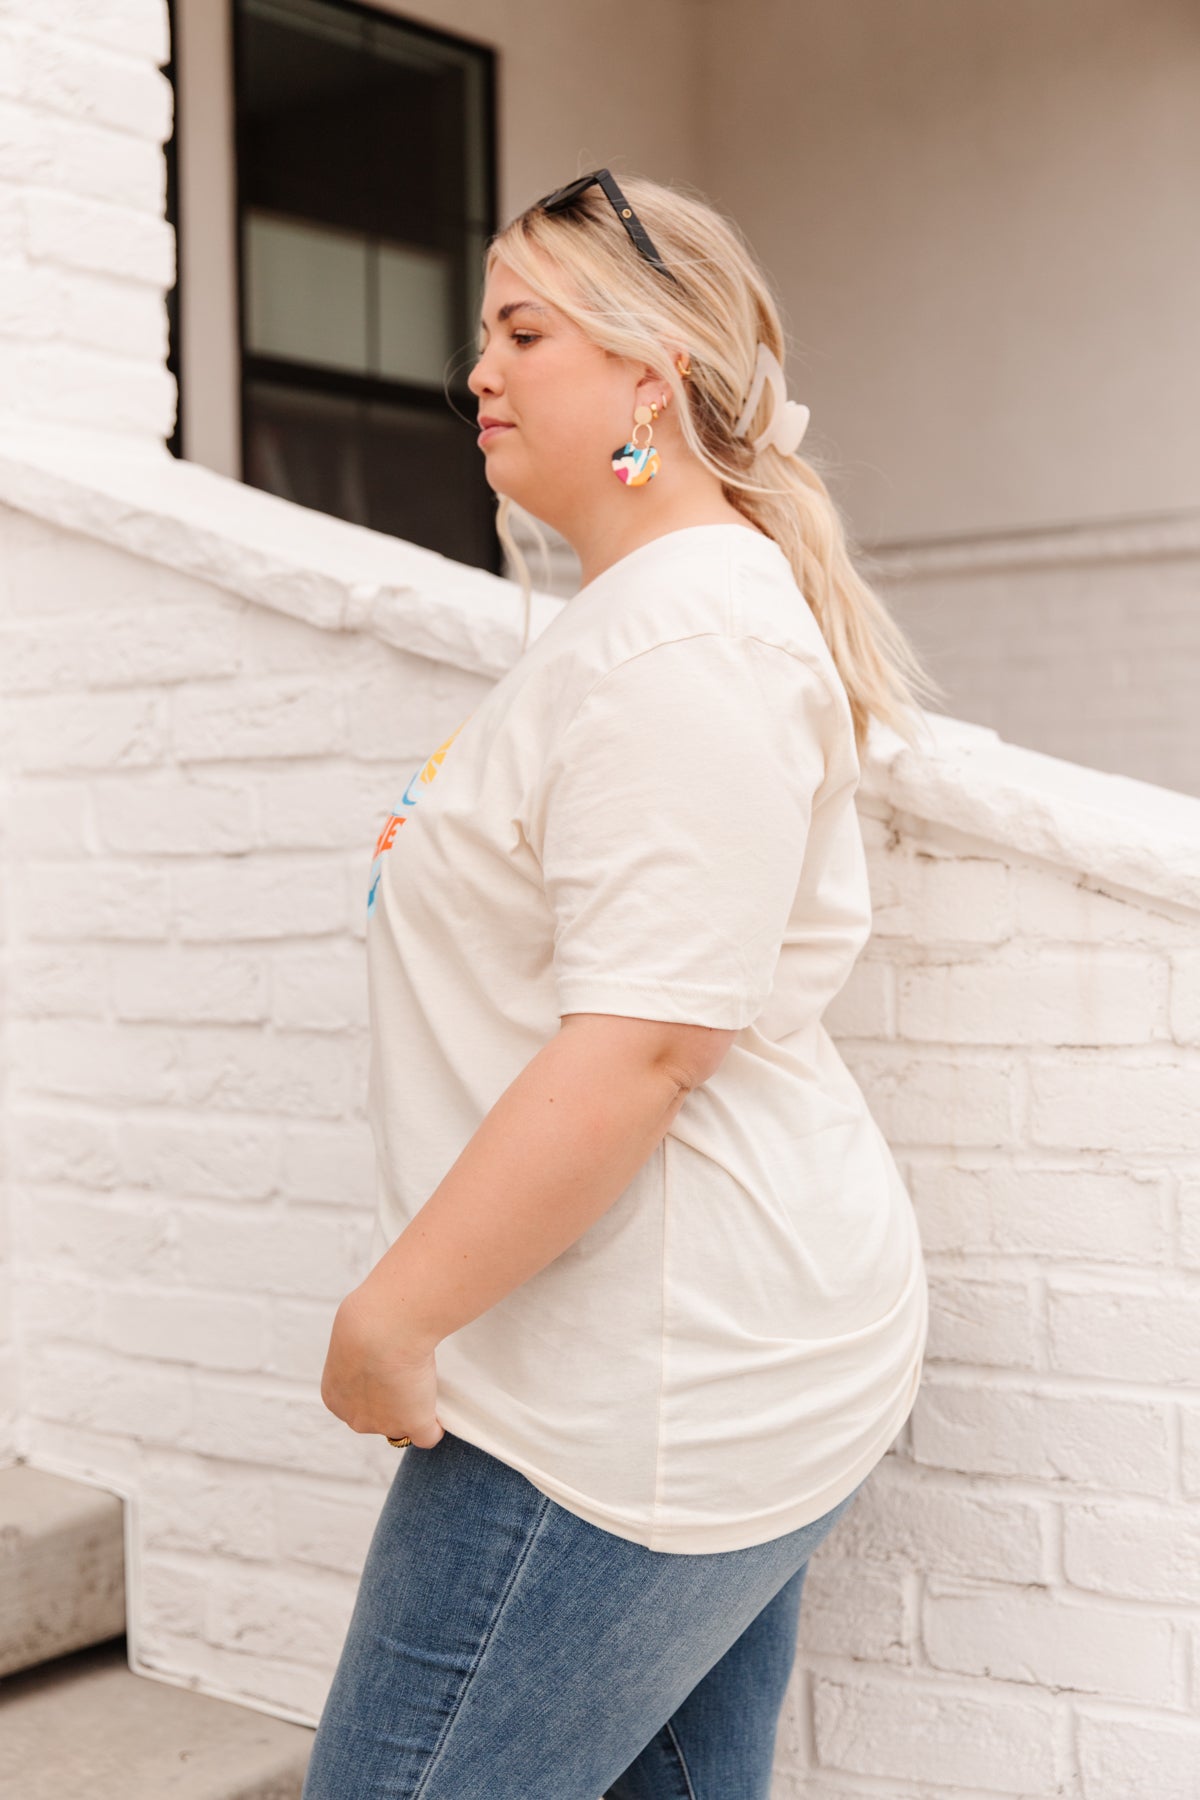 Here Comes the Sun Graphic Tee Womens Southern Soul Collectives 